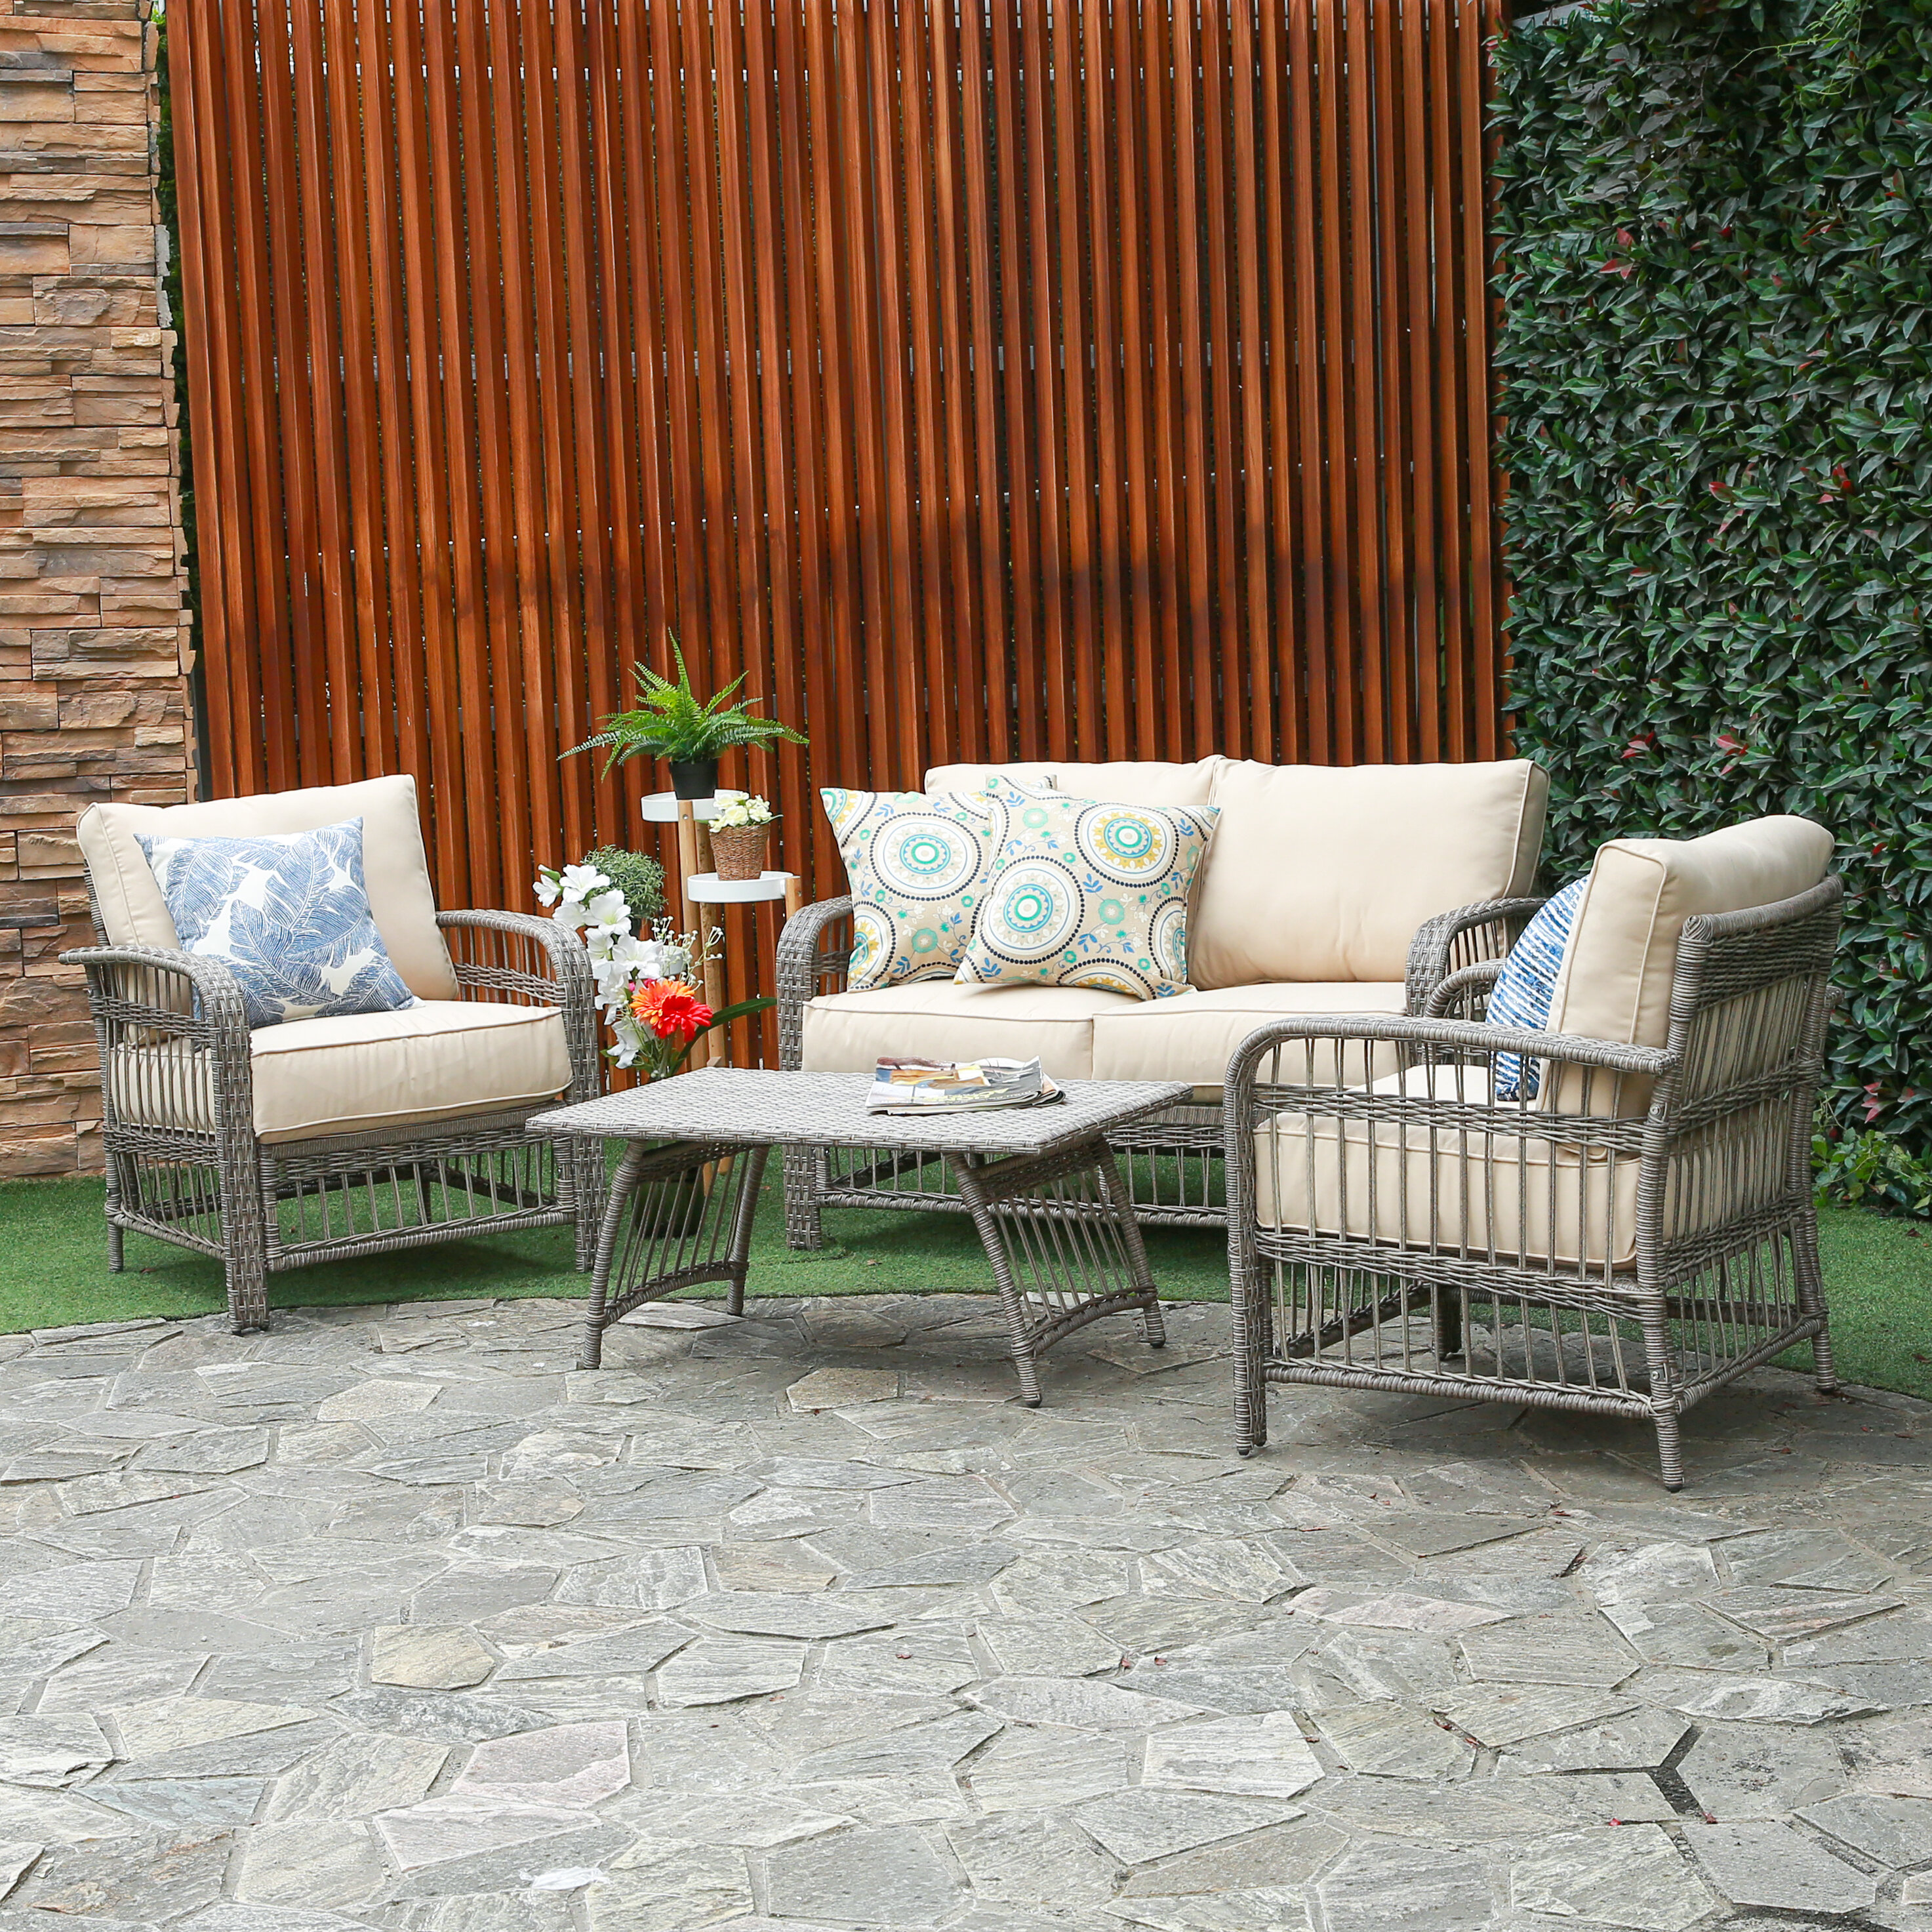 Breakwater Bay Rona 4 Piece Rattan Sofa Seating Group With